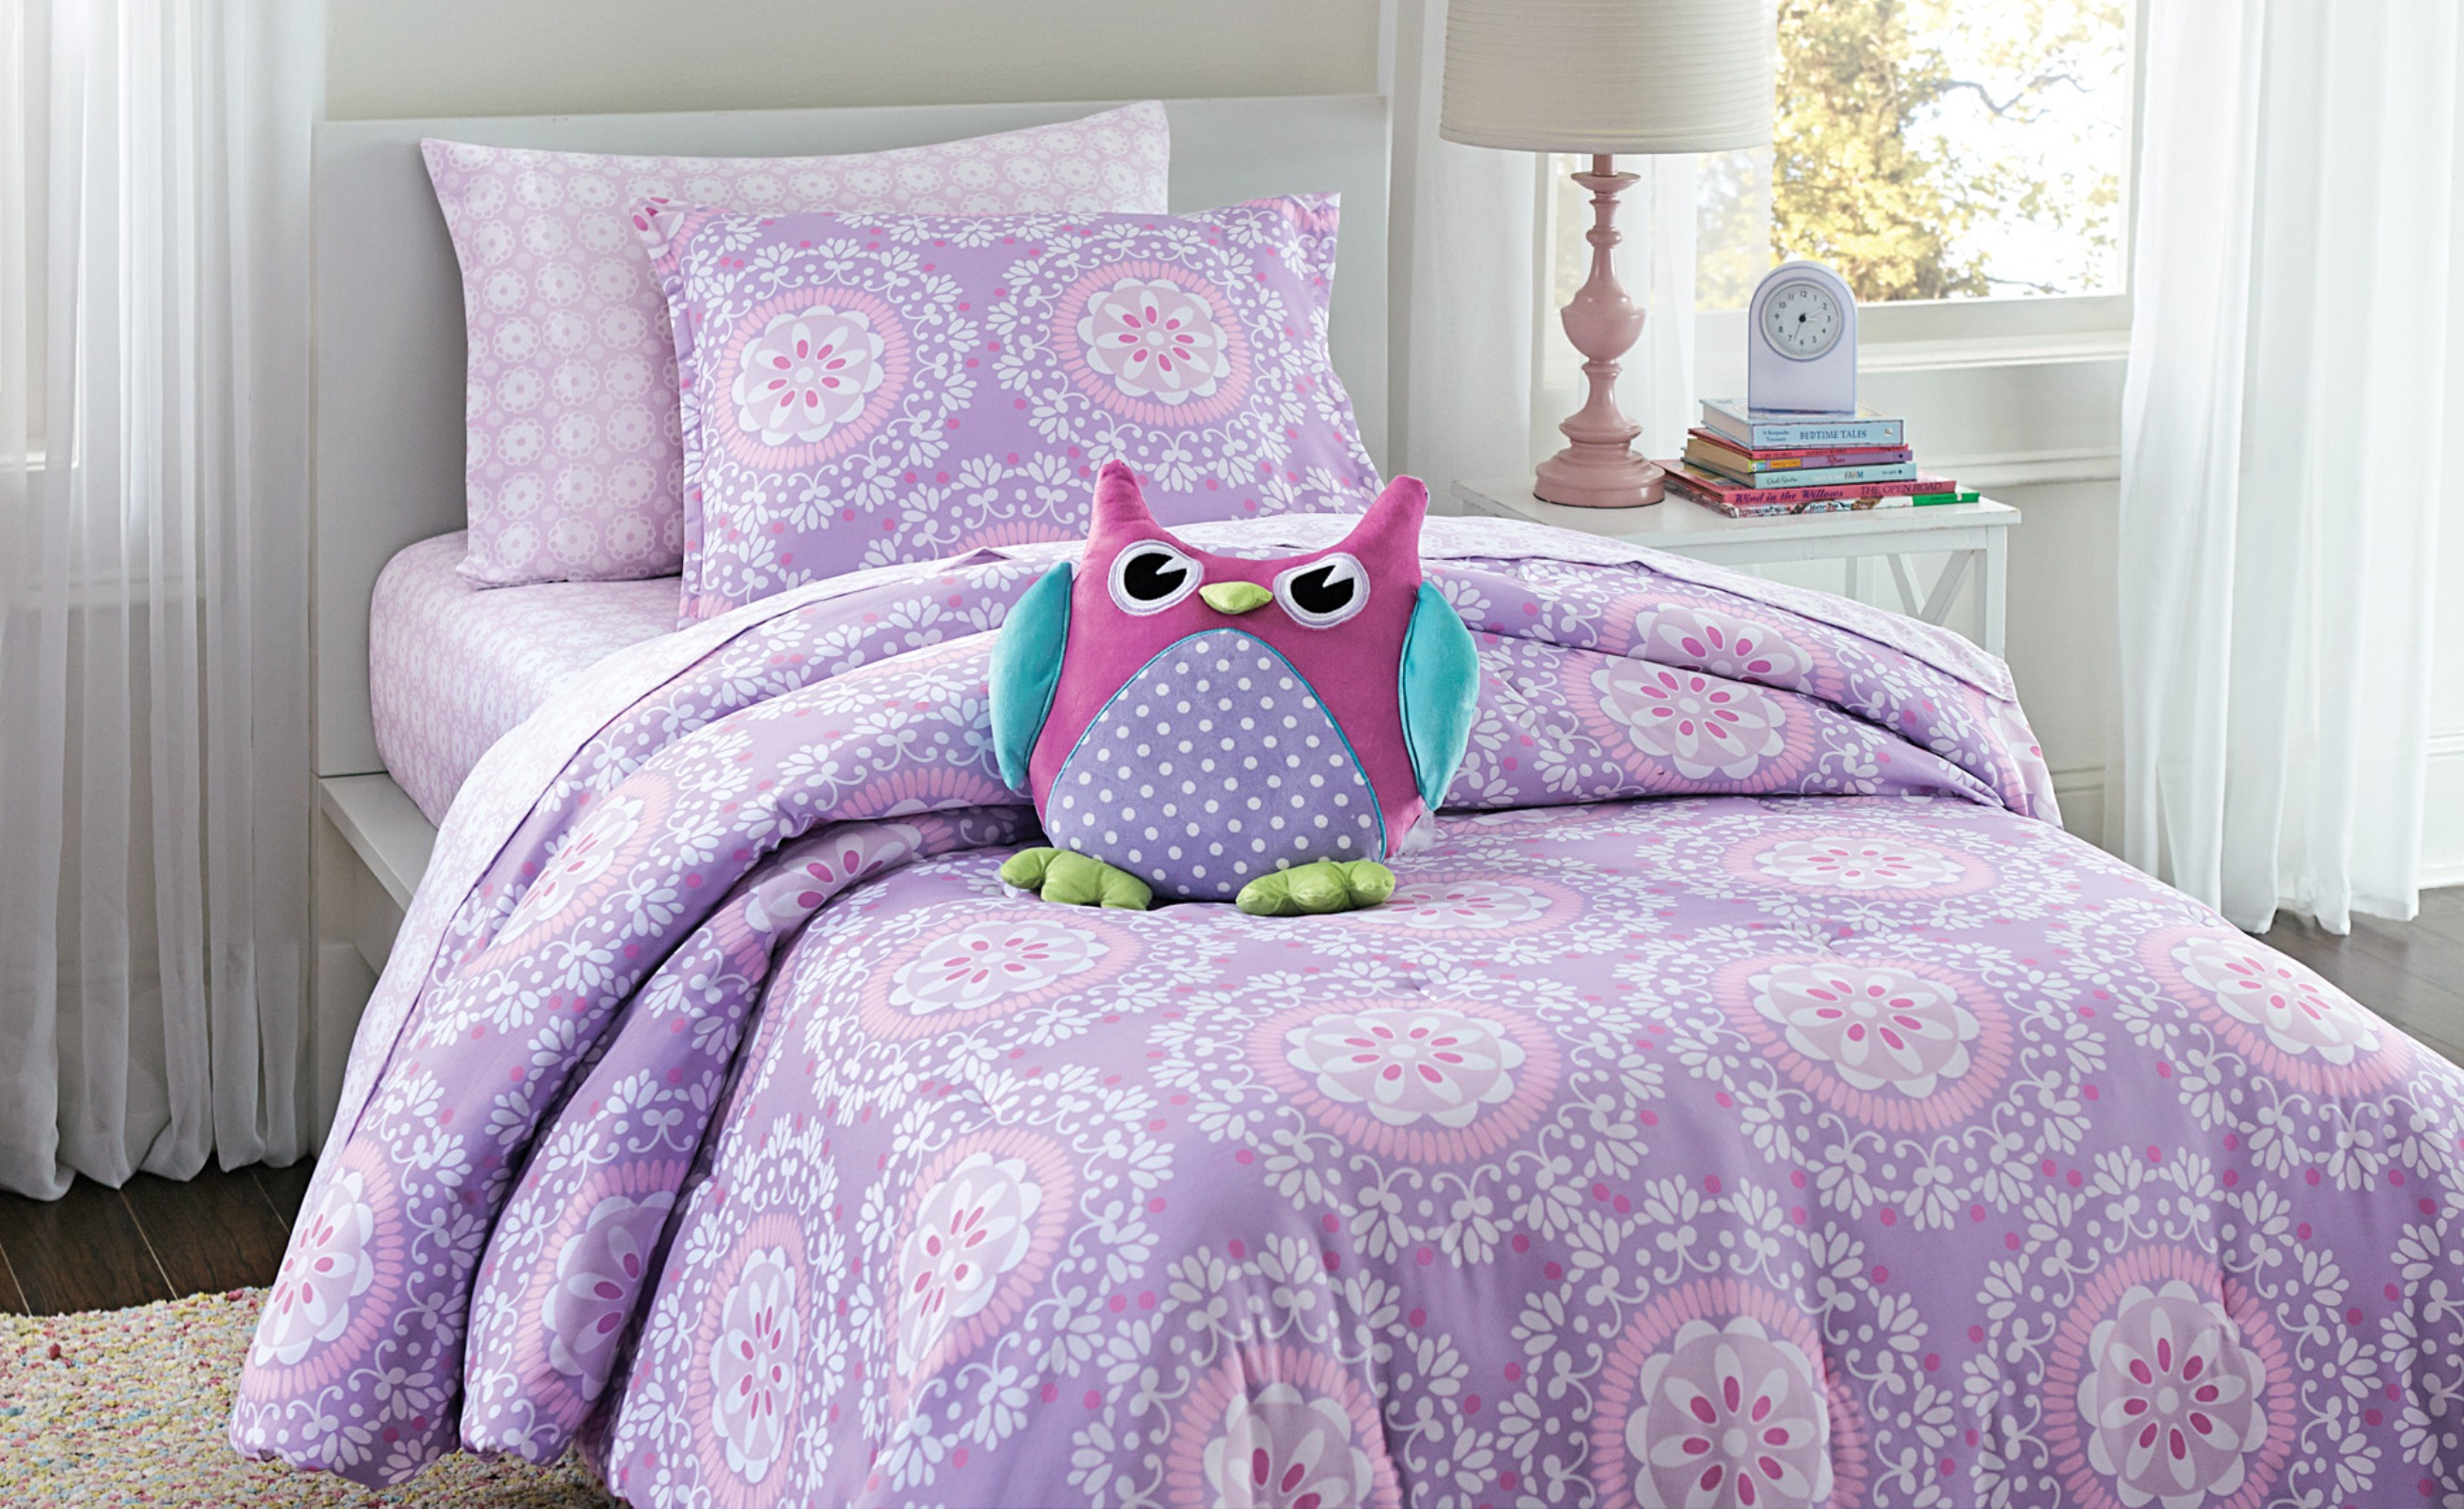 Twin Comforter Sets Purple - How To Blog